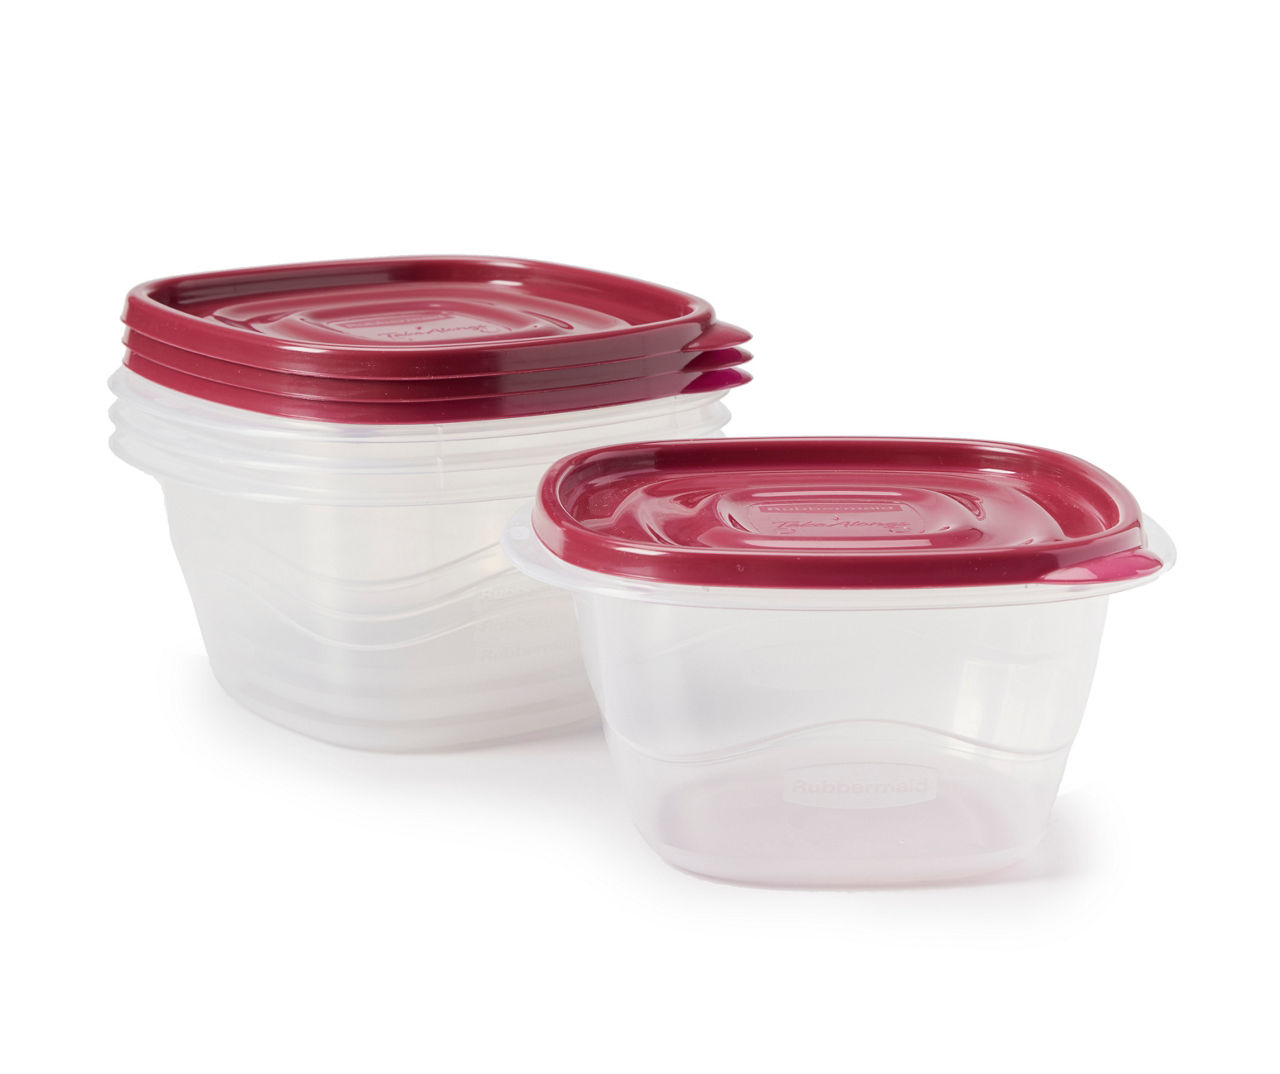 Rubbermaid Easy Find Lids 5-Cup Plastic Storage Container